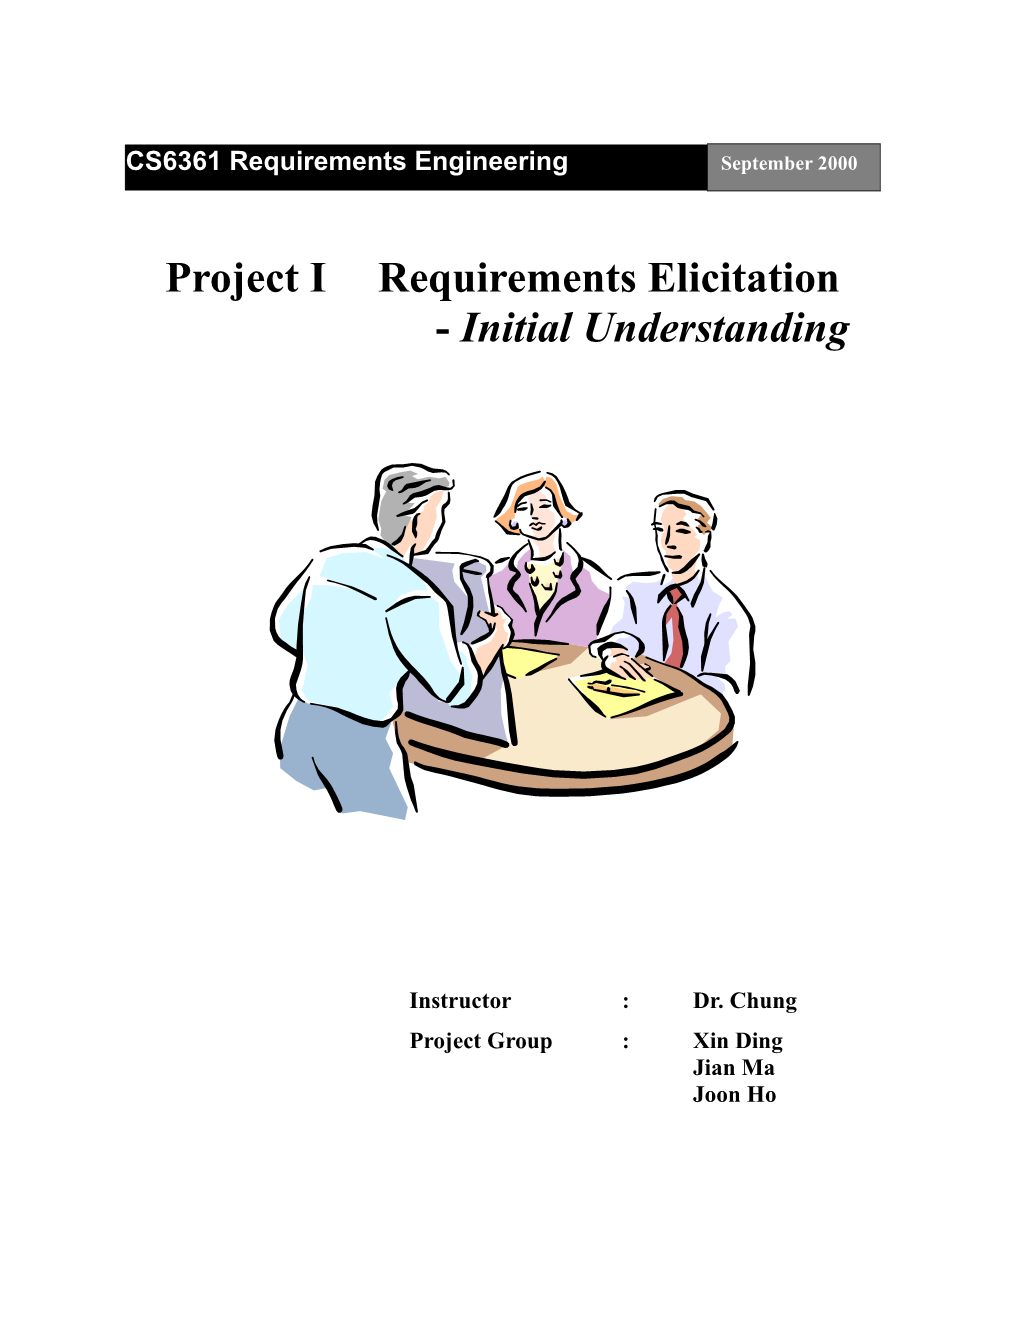 Project Irequirements Elicitation